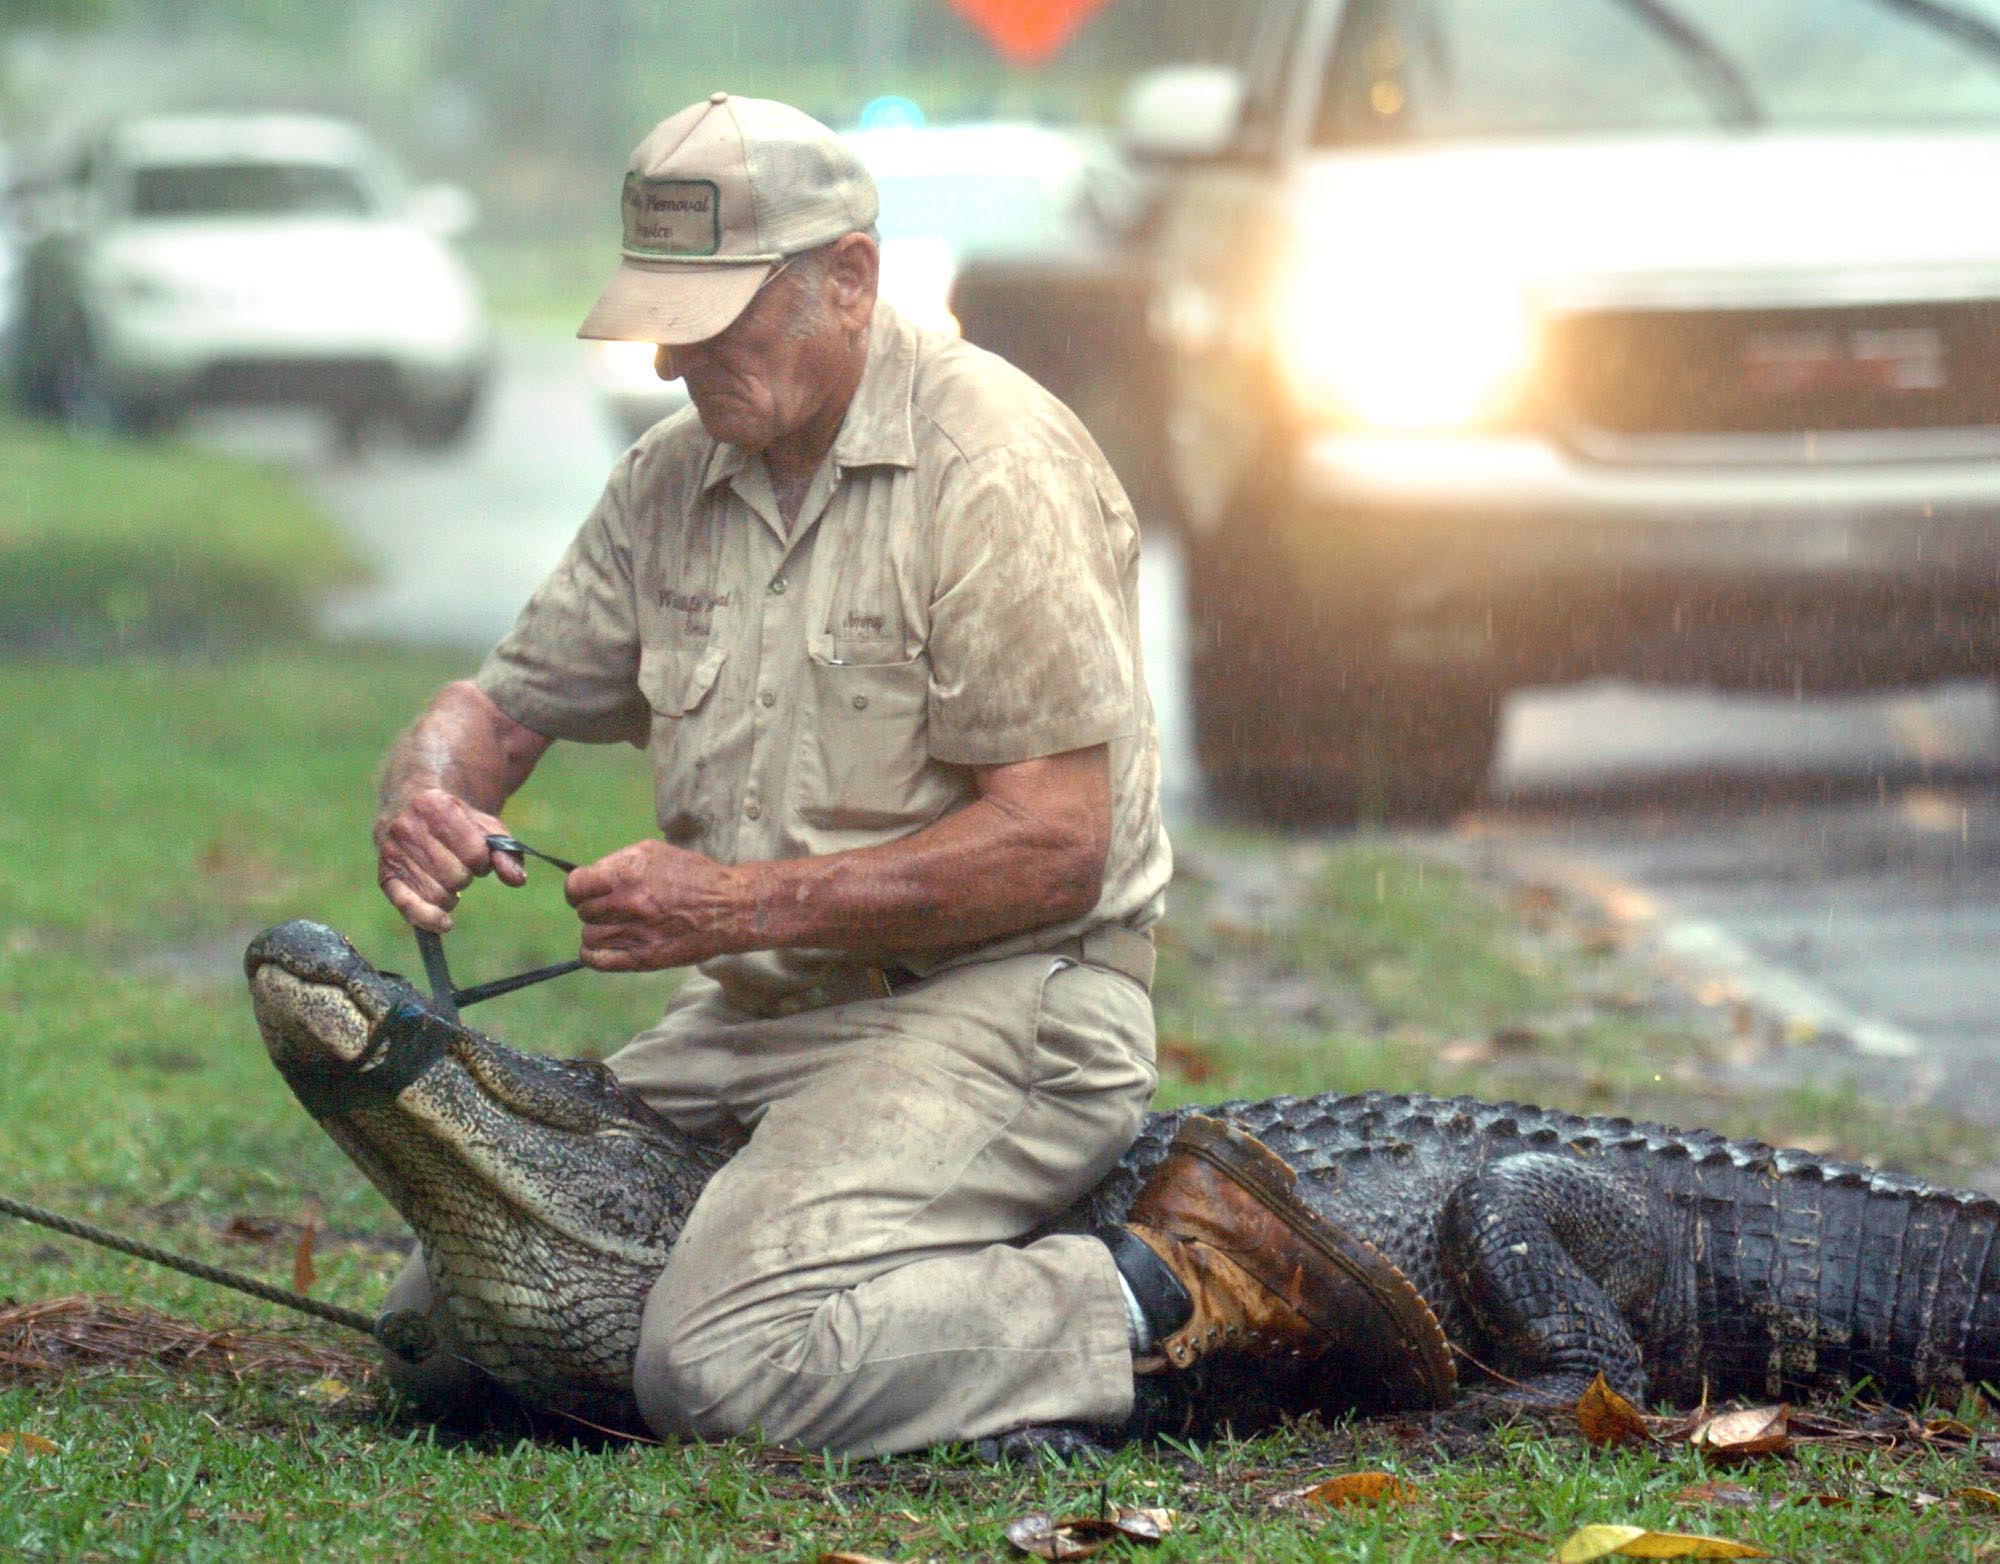 Fwc Looking For Nuisance Alligator Trappers In Duval